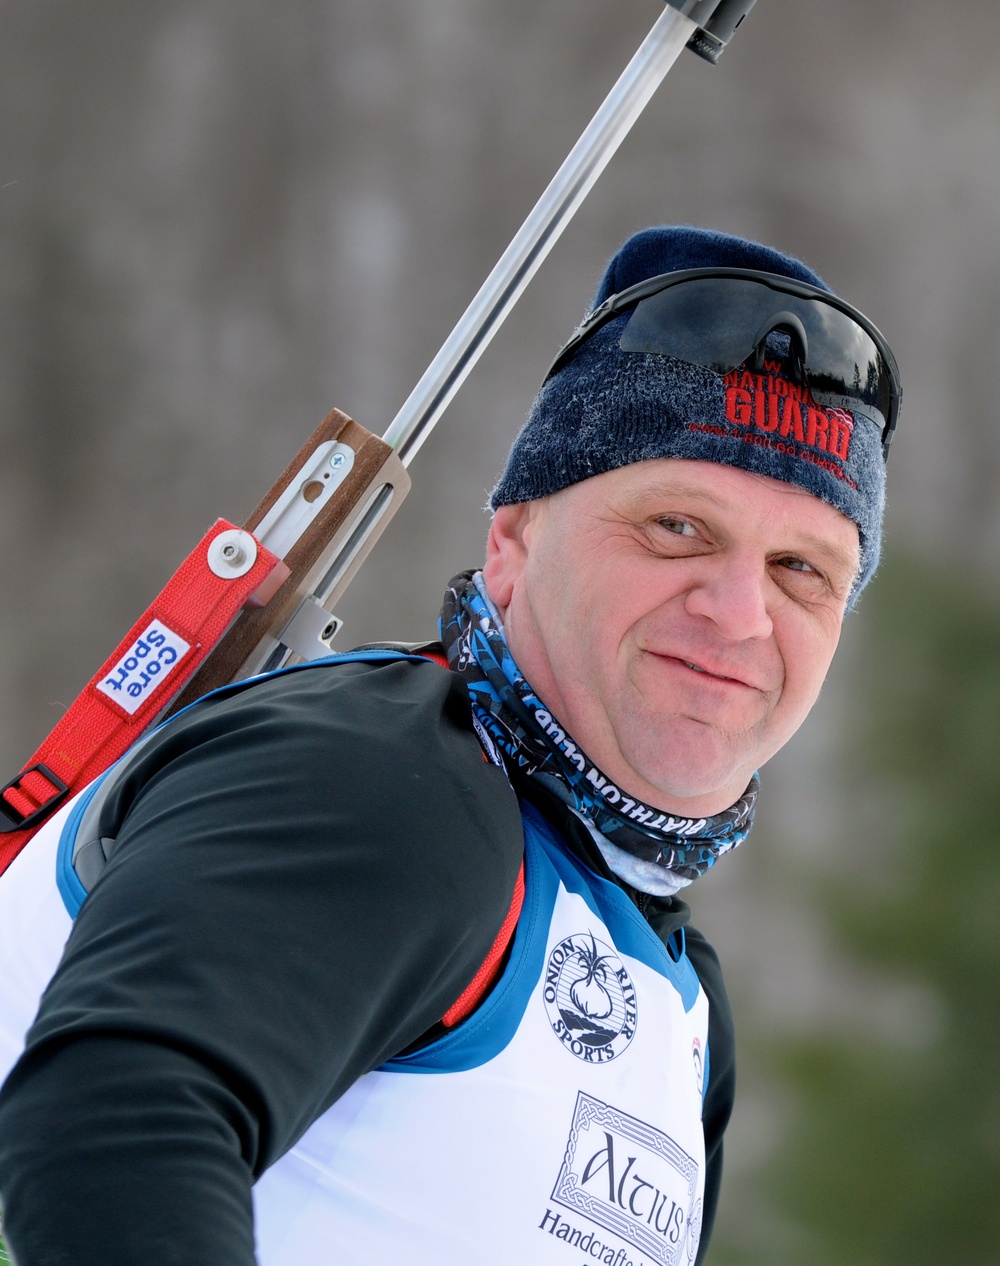 New York National Guard soldier skis, shoots in biathlon competition